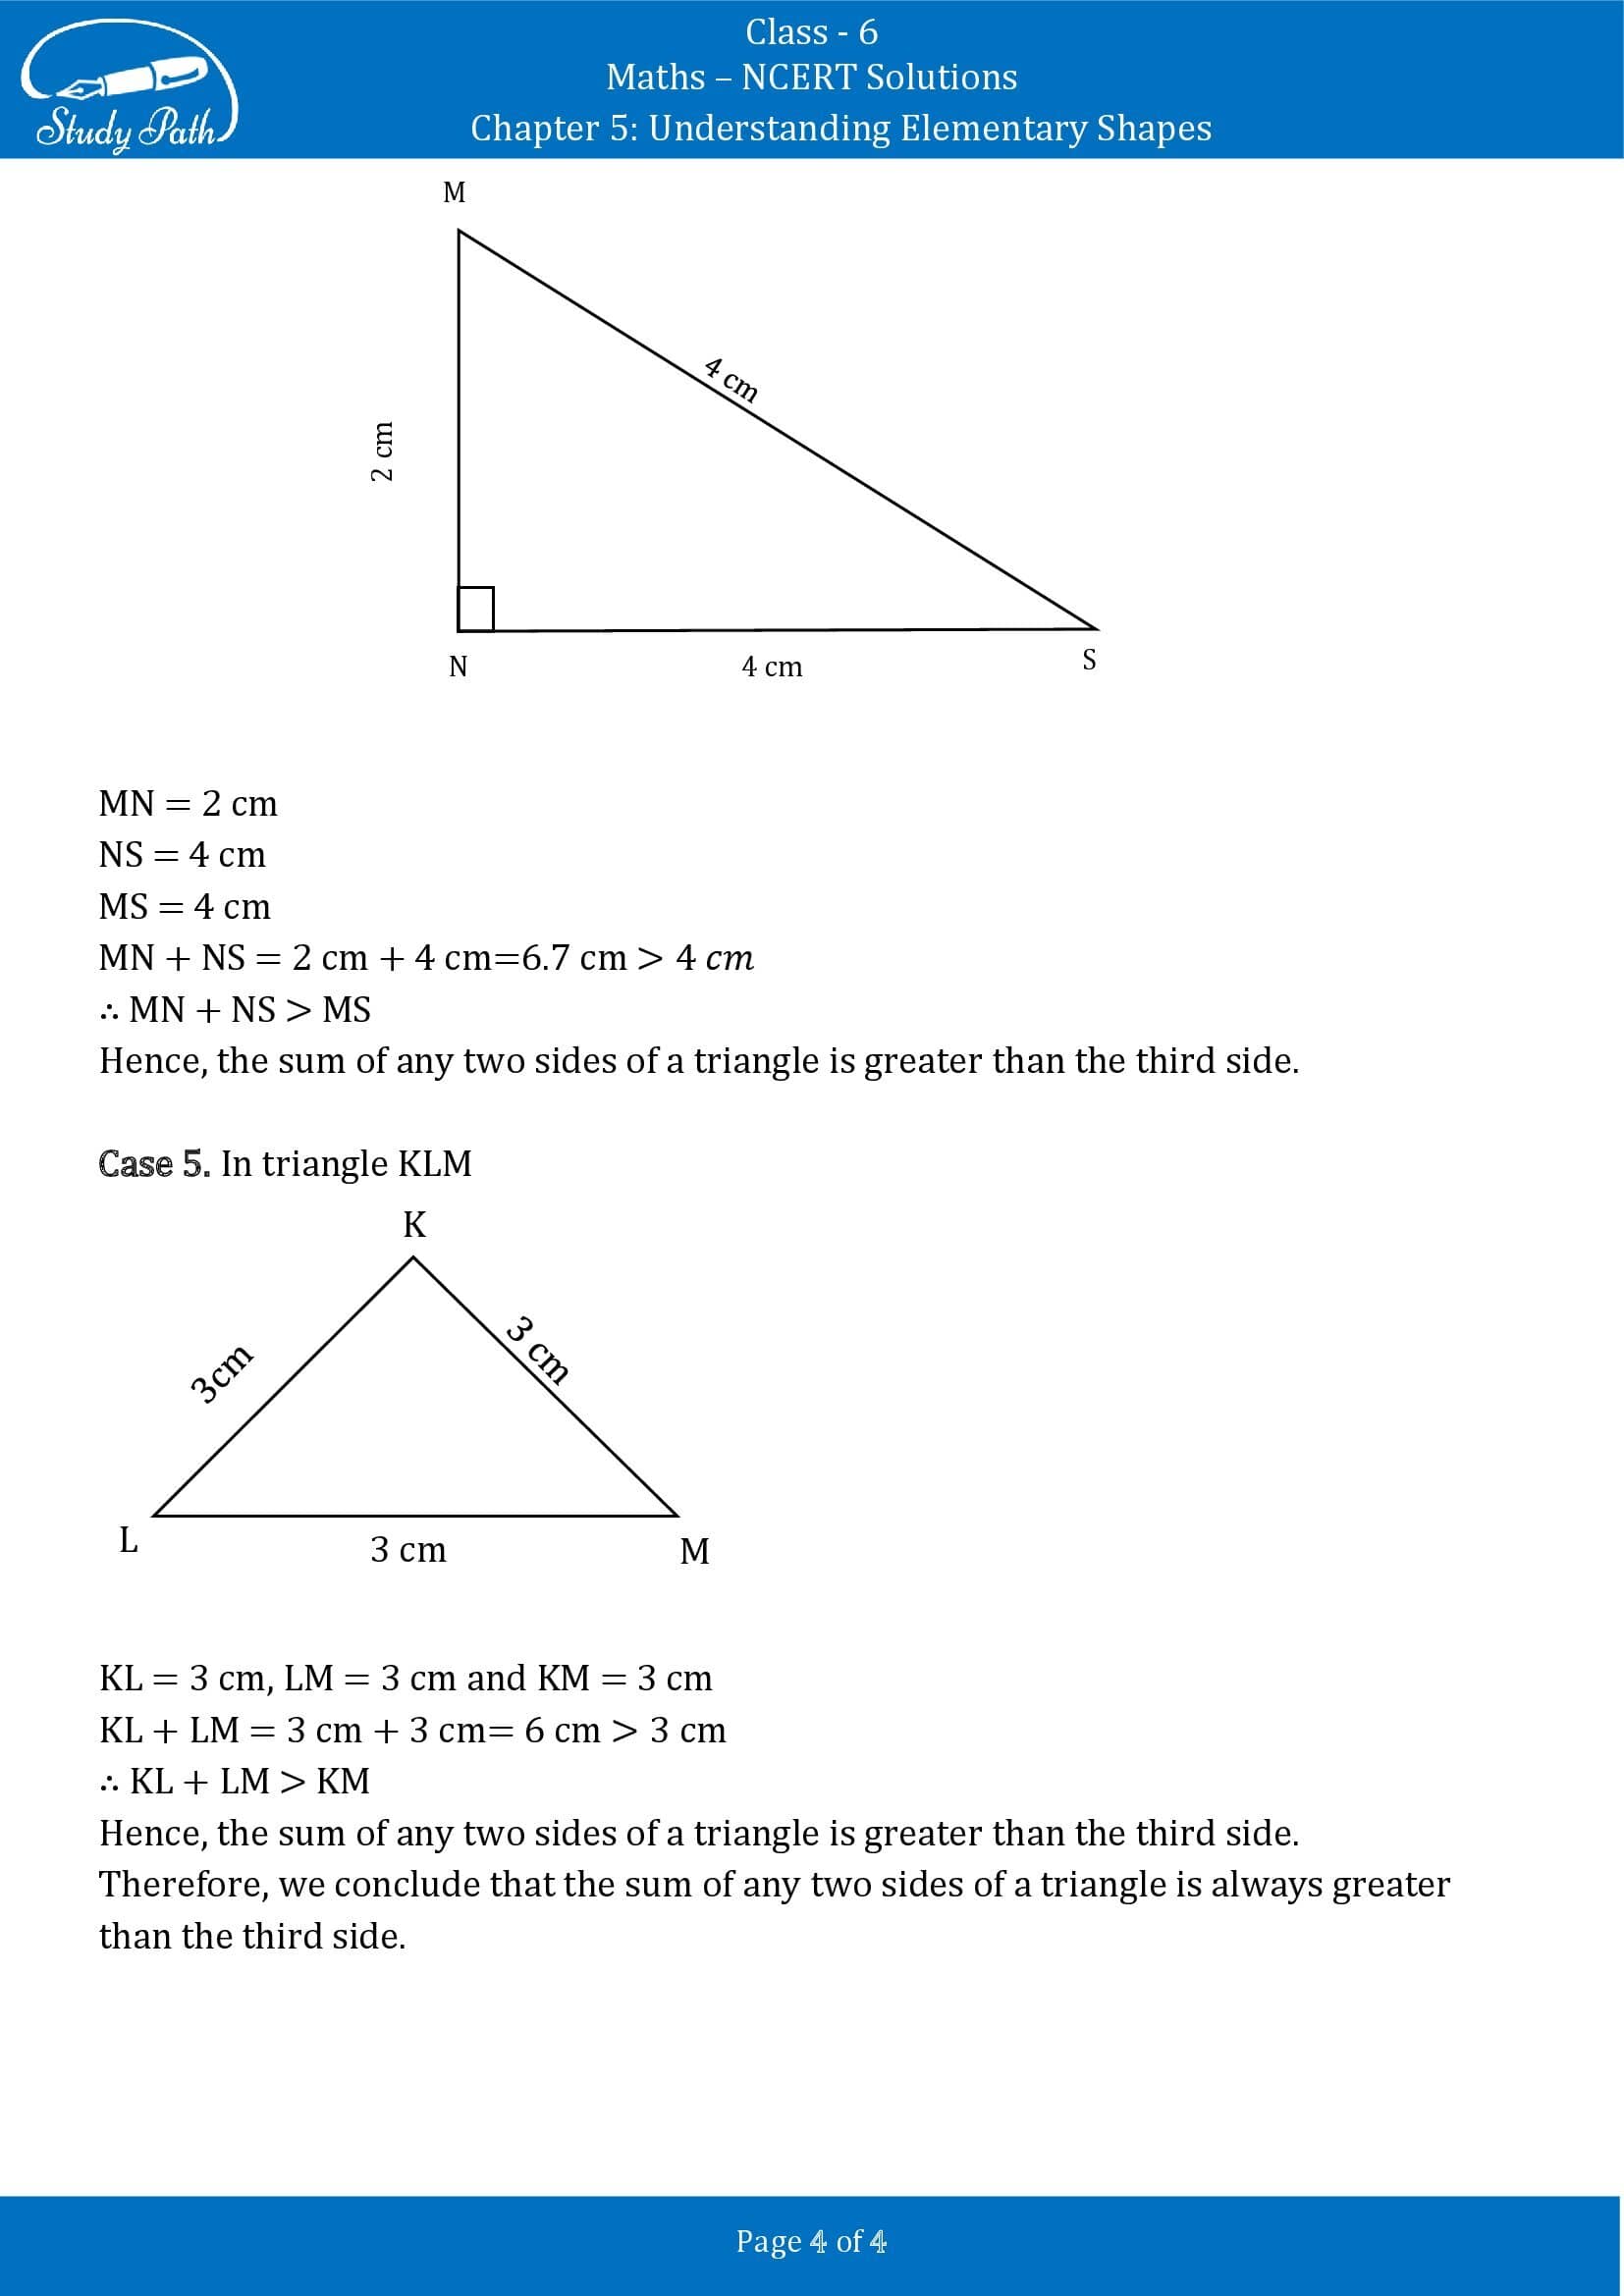 NCERT Solutions for Class 6 Maths Chapter 5 Understanding Elementary Shapes Exercise 5.1 00004